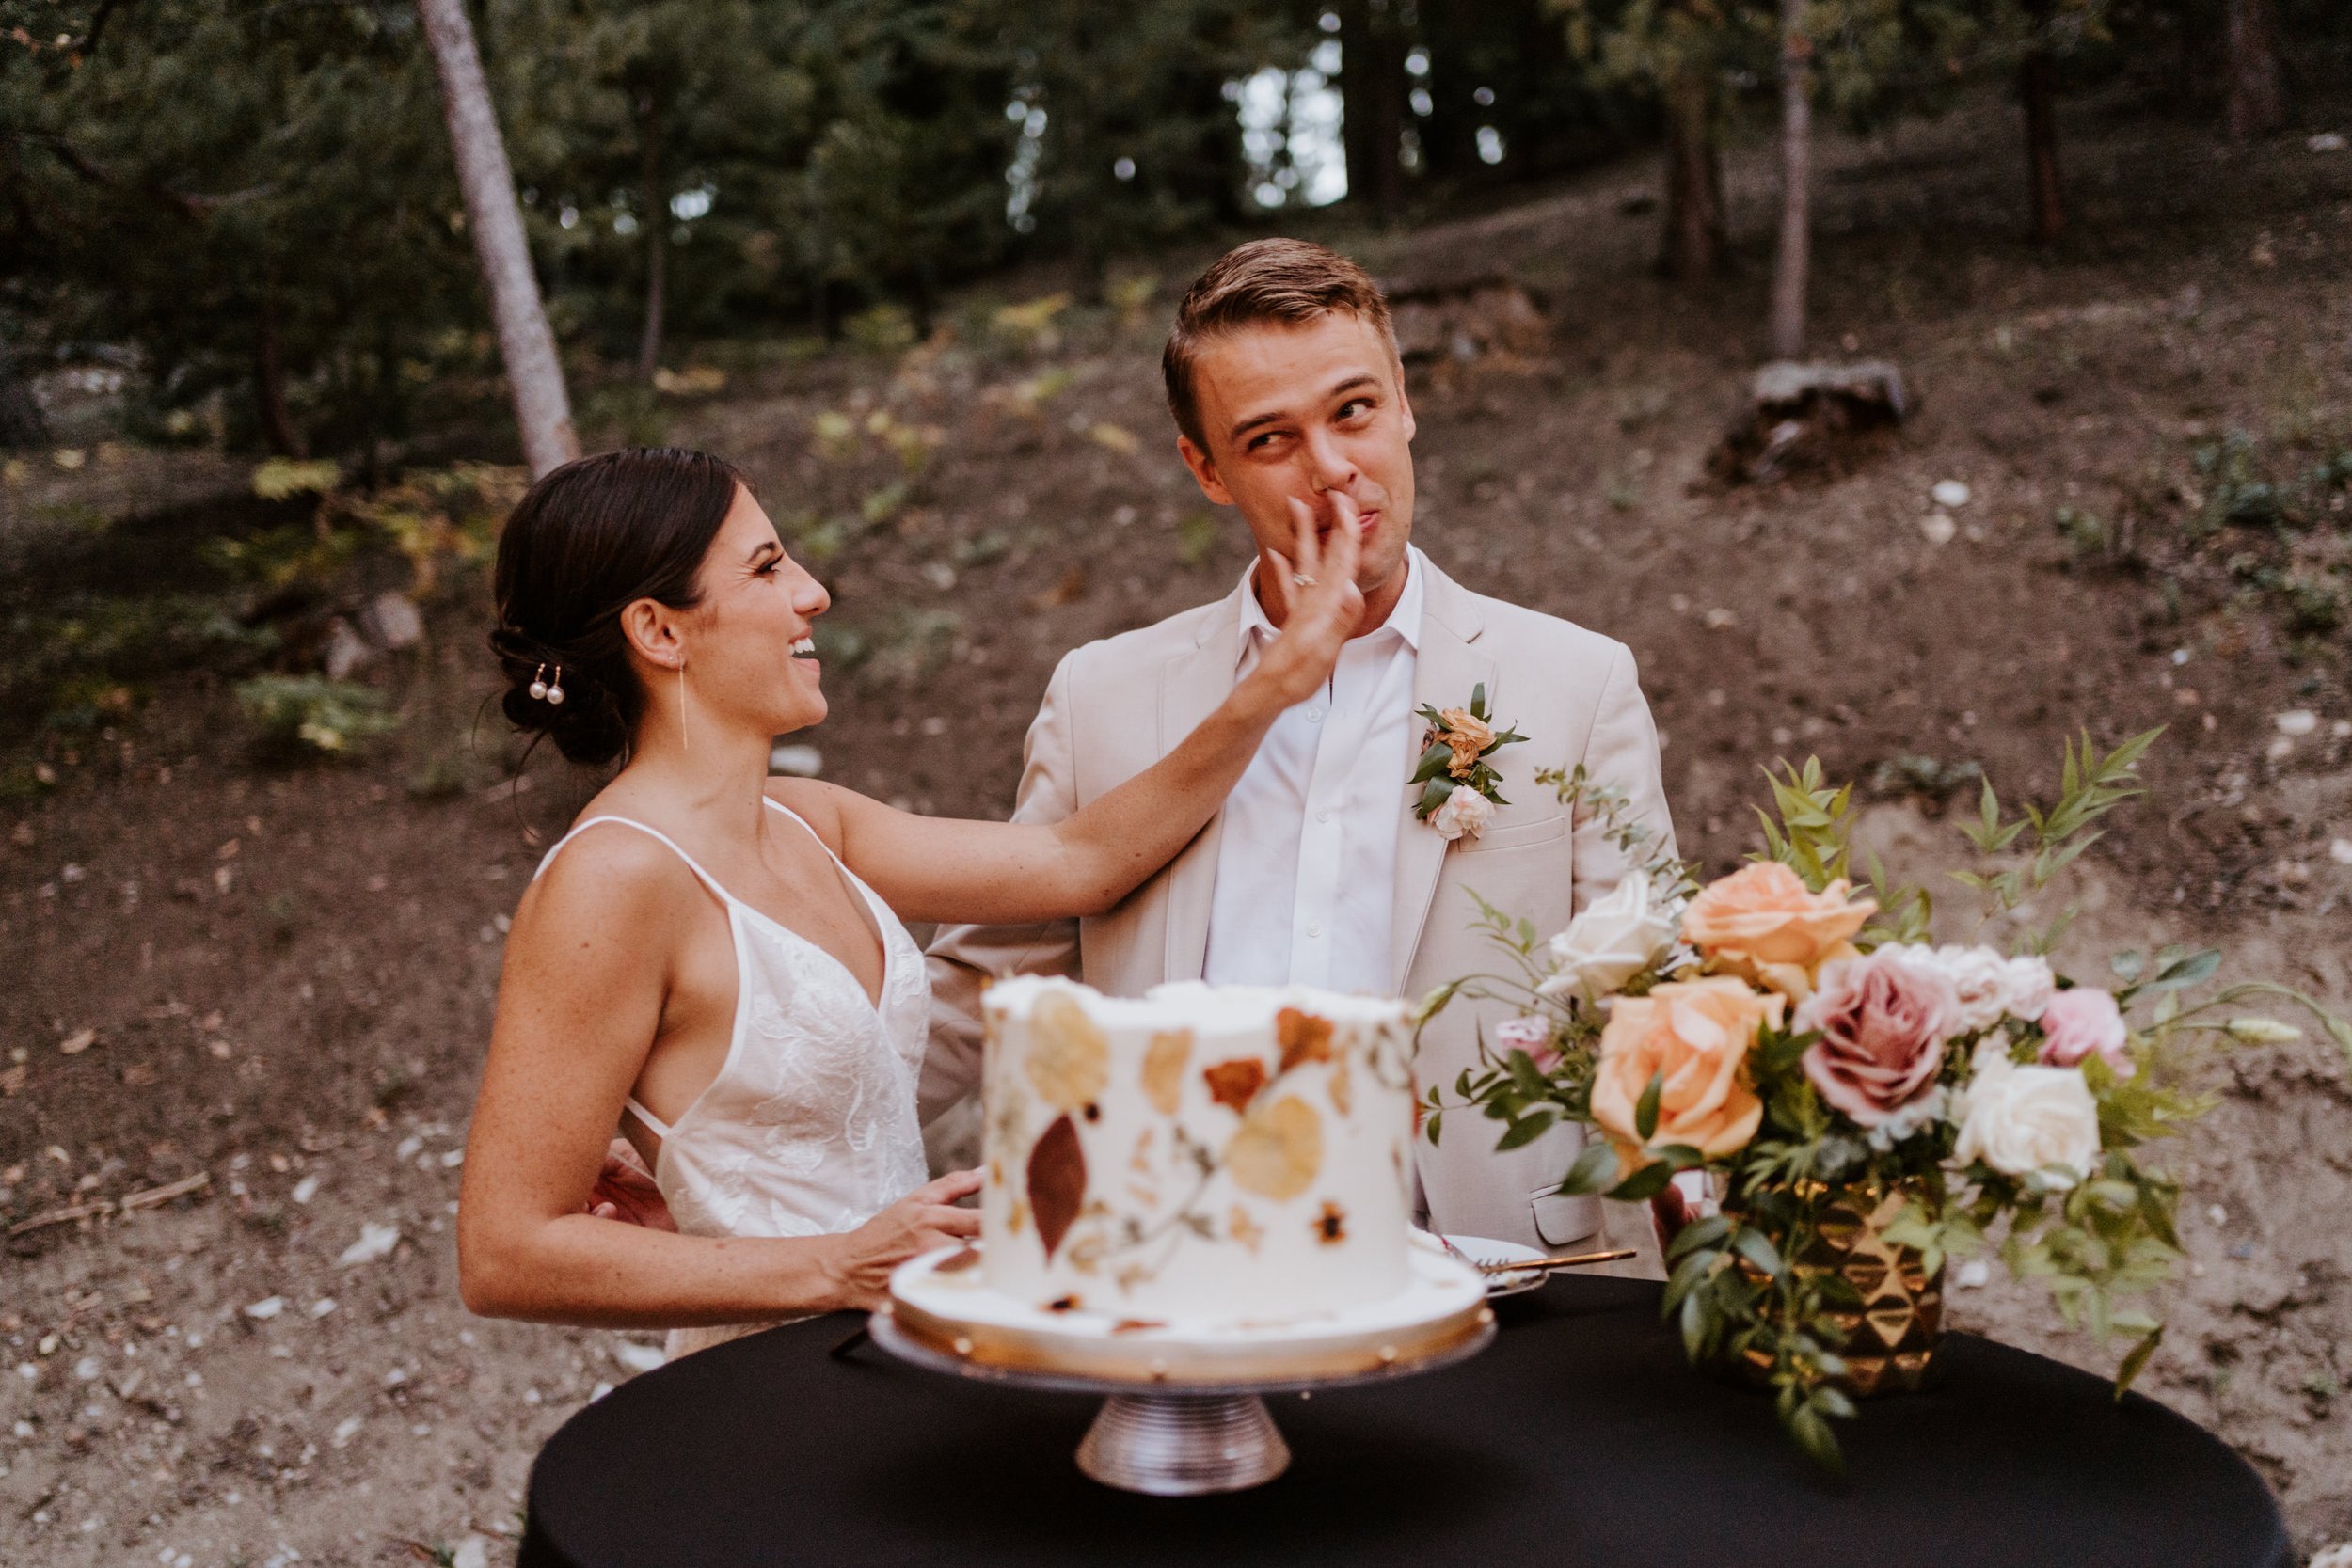 Fun cake cutting photo, Simple enchanted whimsical fall wedding cake, Castle in the Forest Lake Arrowhead airbnb wedding, Photo by Tida Svy